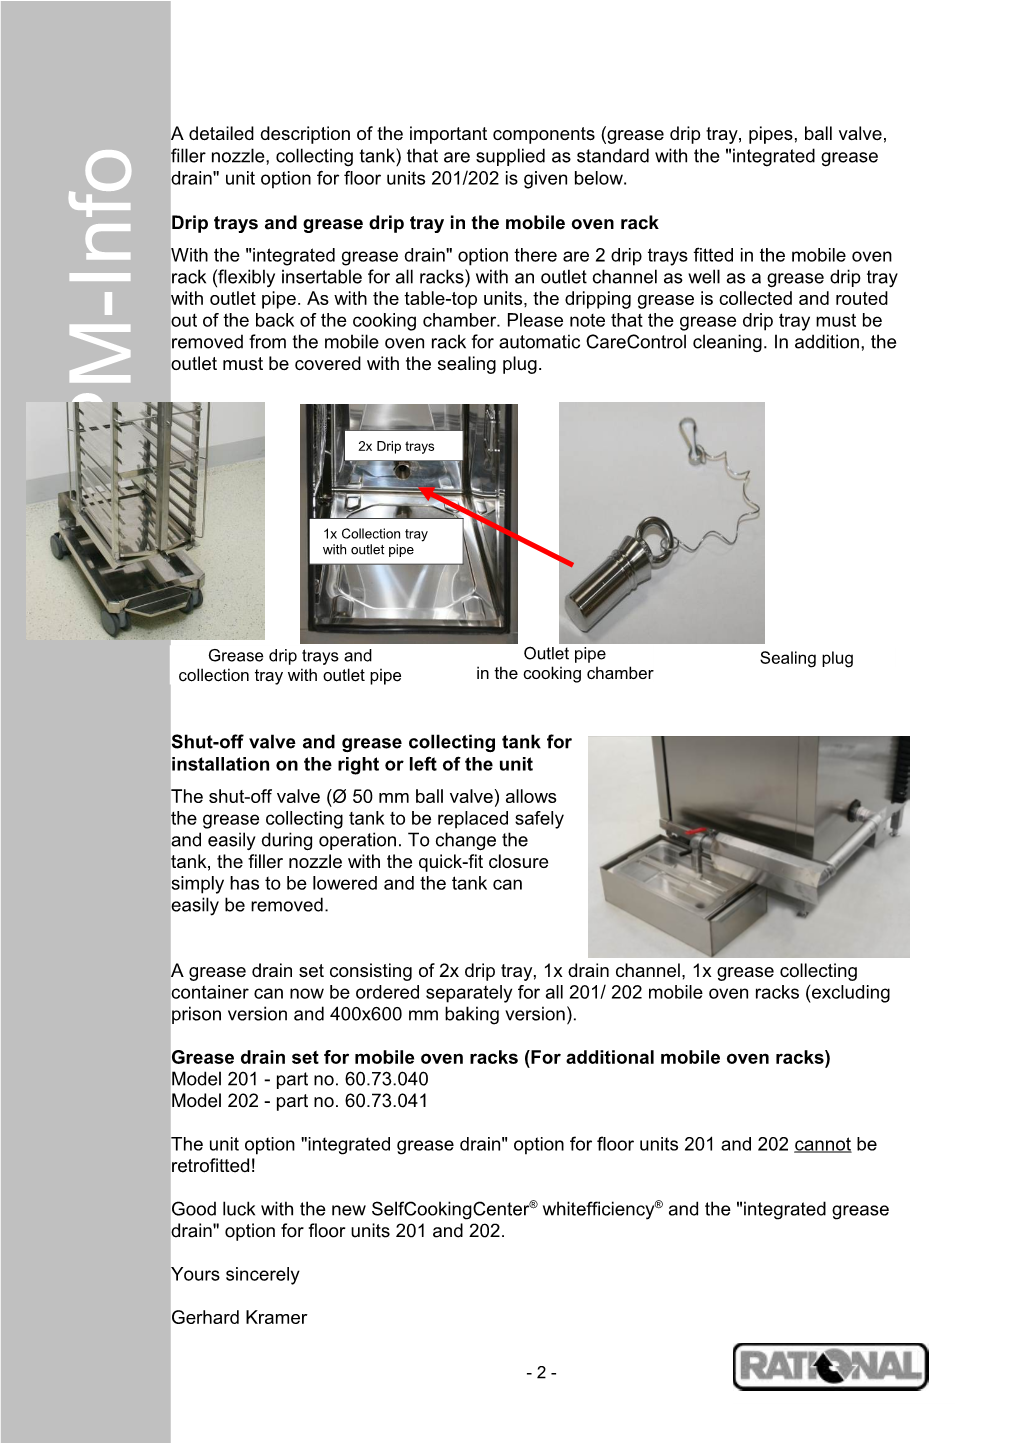 Subject: Integrated Grease Drain for Selfcookingcenter Whitefficiency Floor Units 201/202